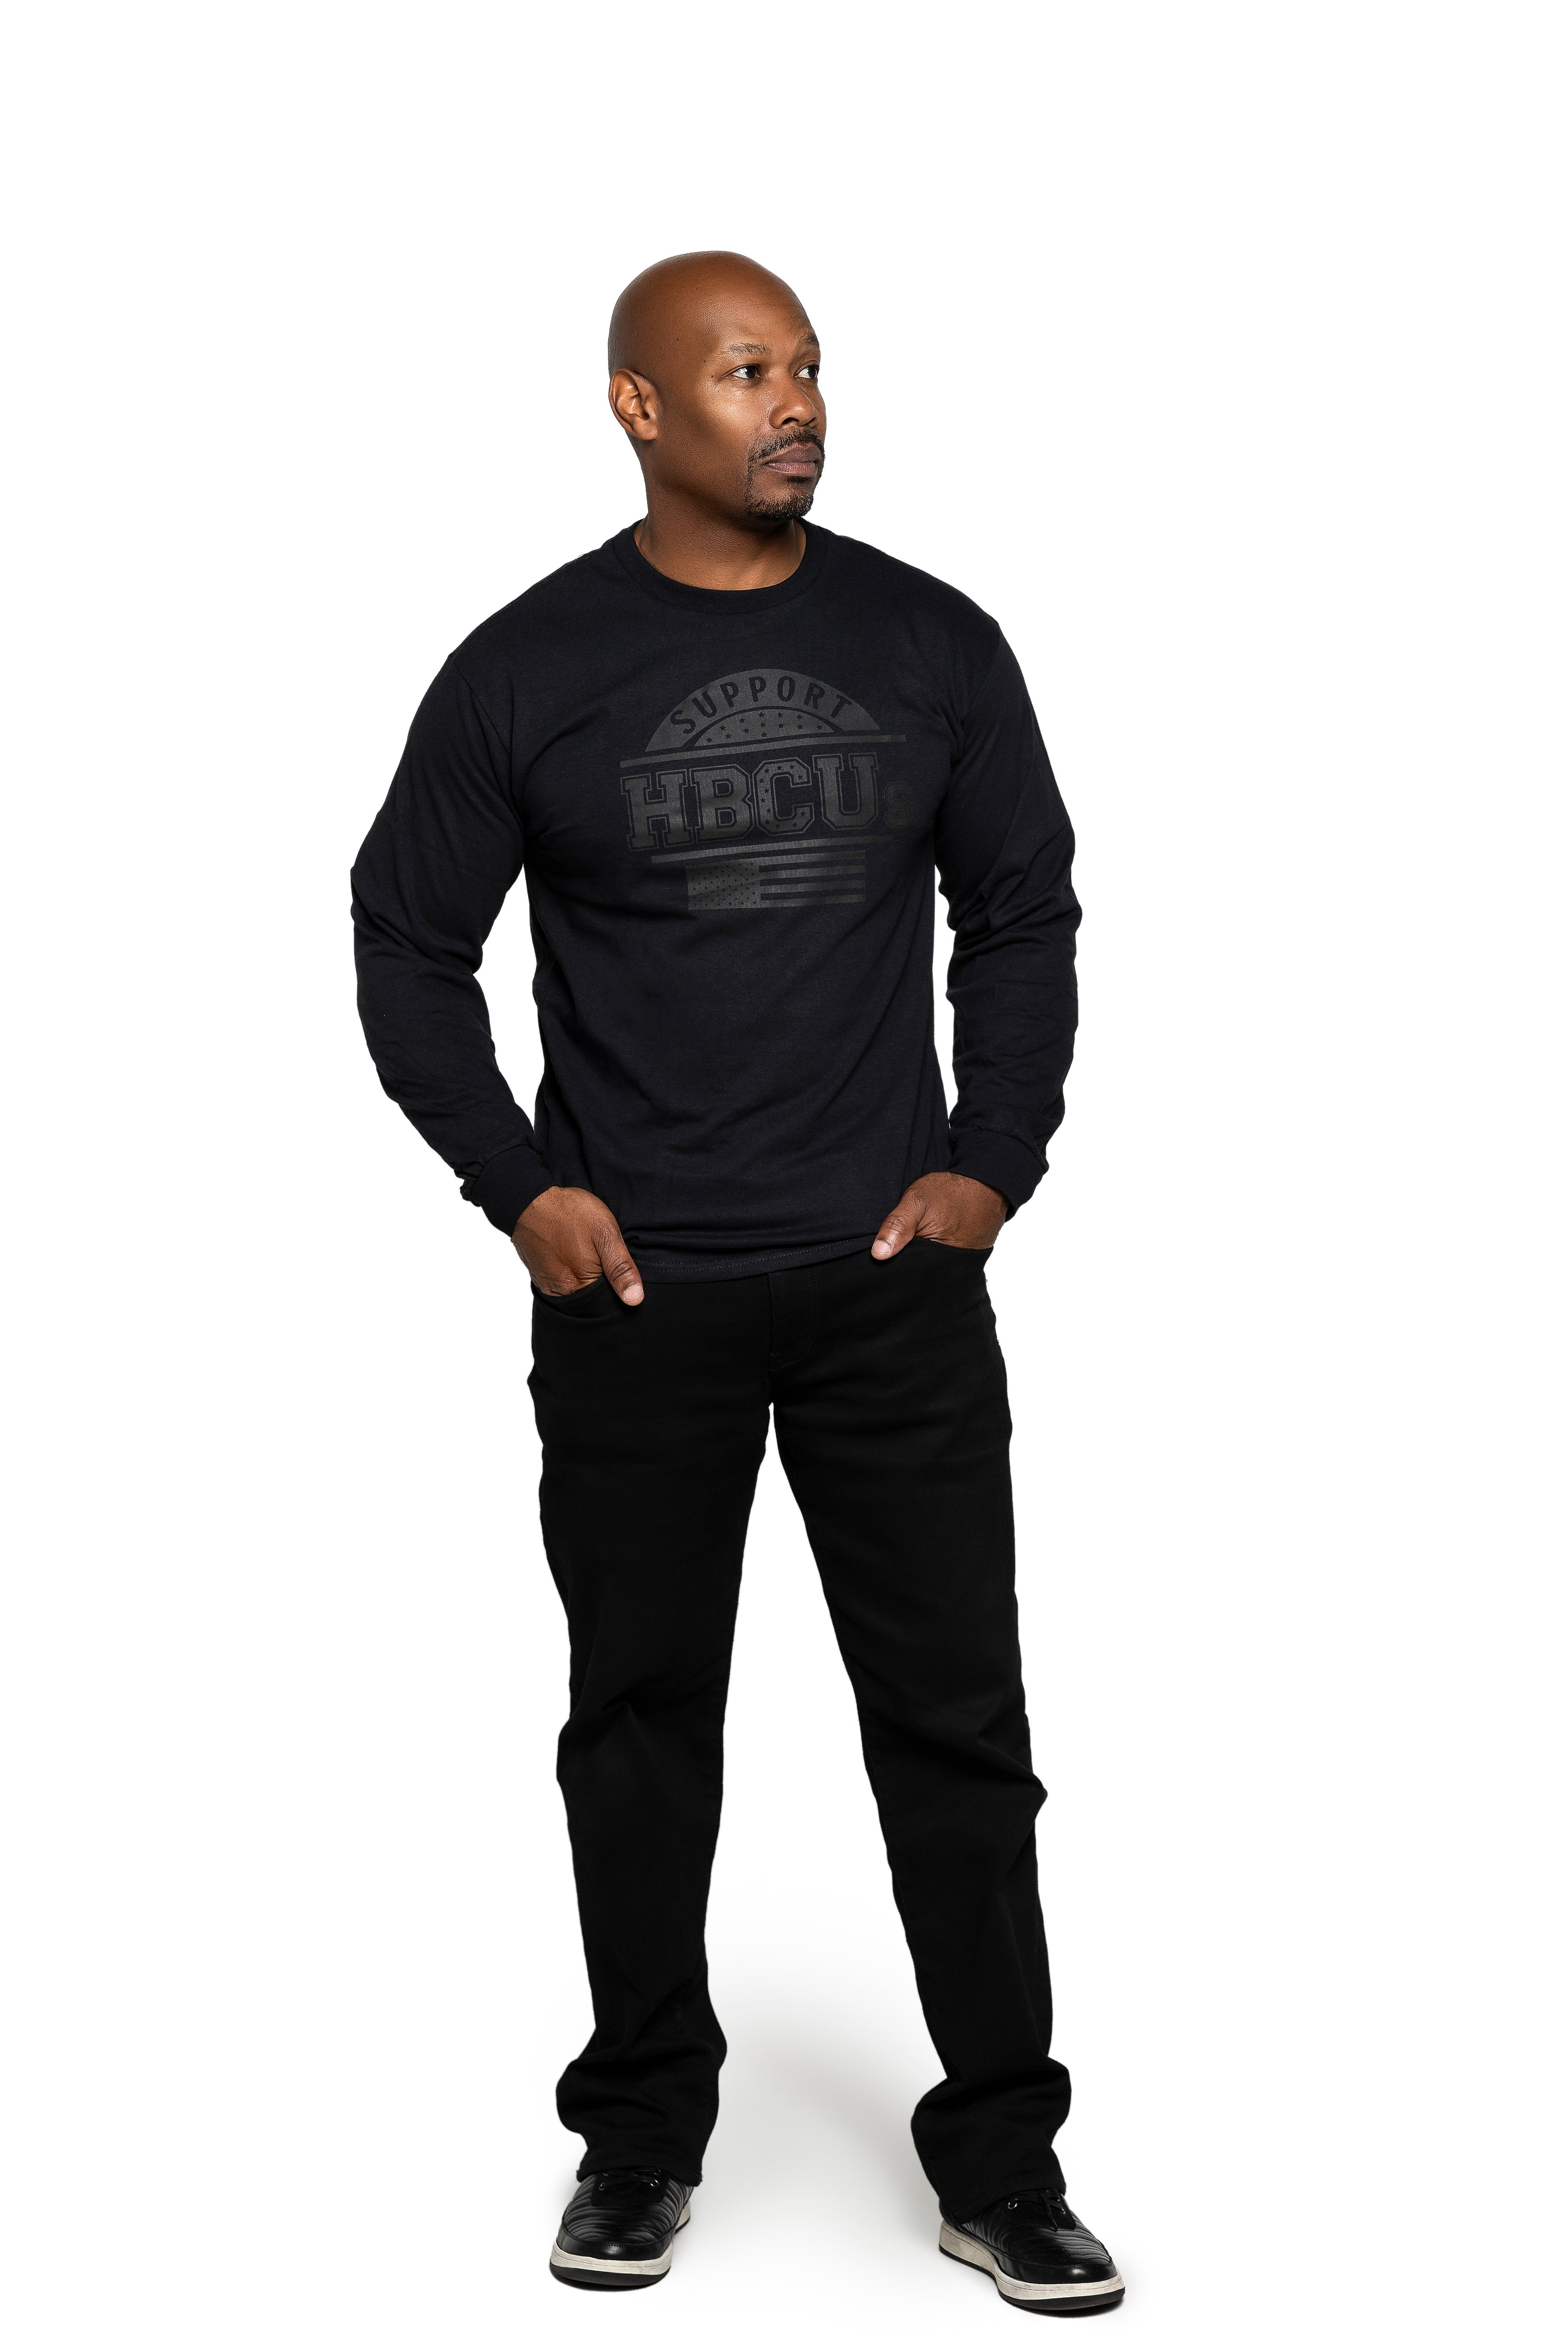 ALL BLACK SUPPORT HBCUs LONG SLEEVES TEE